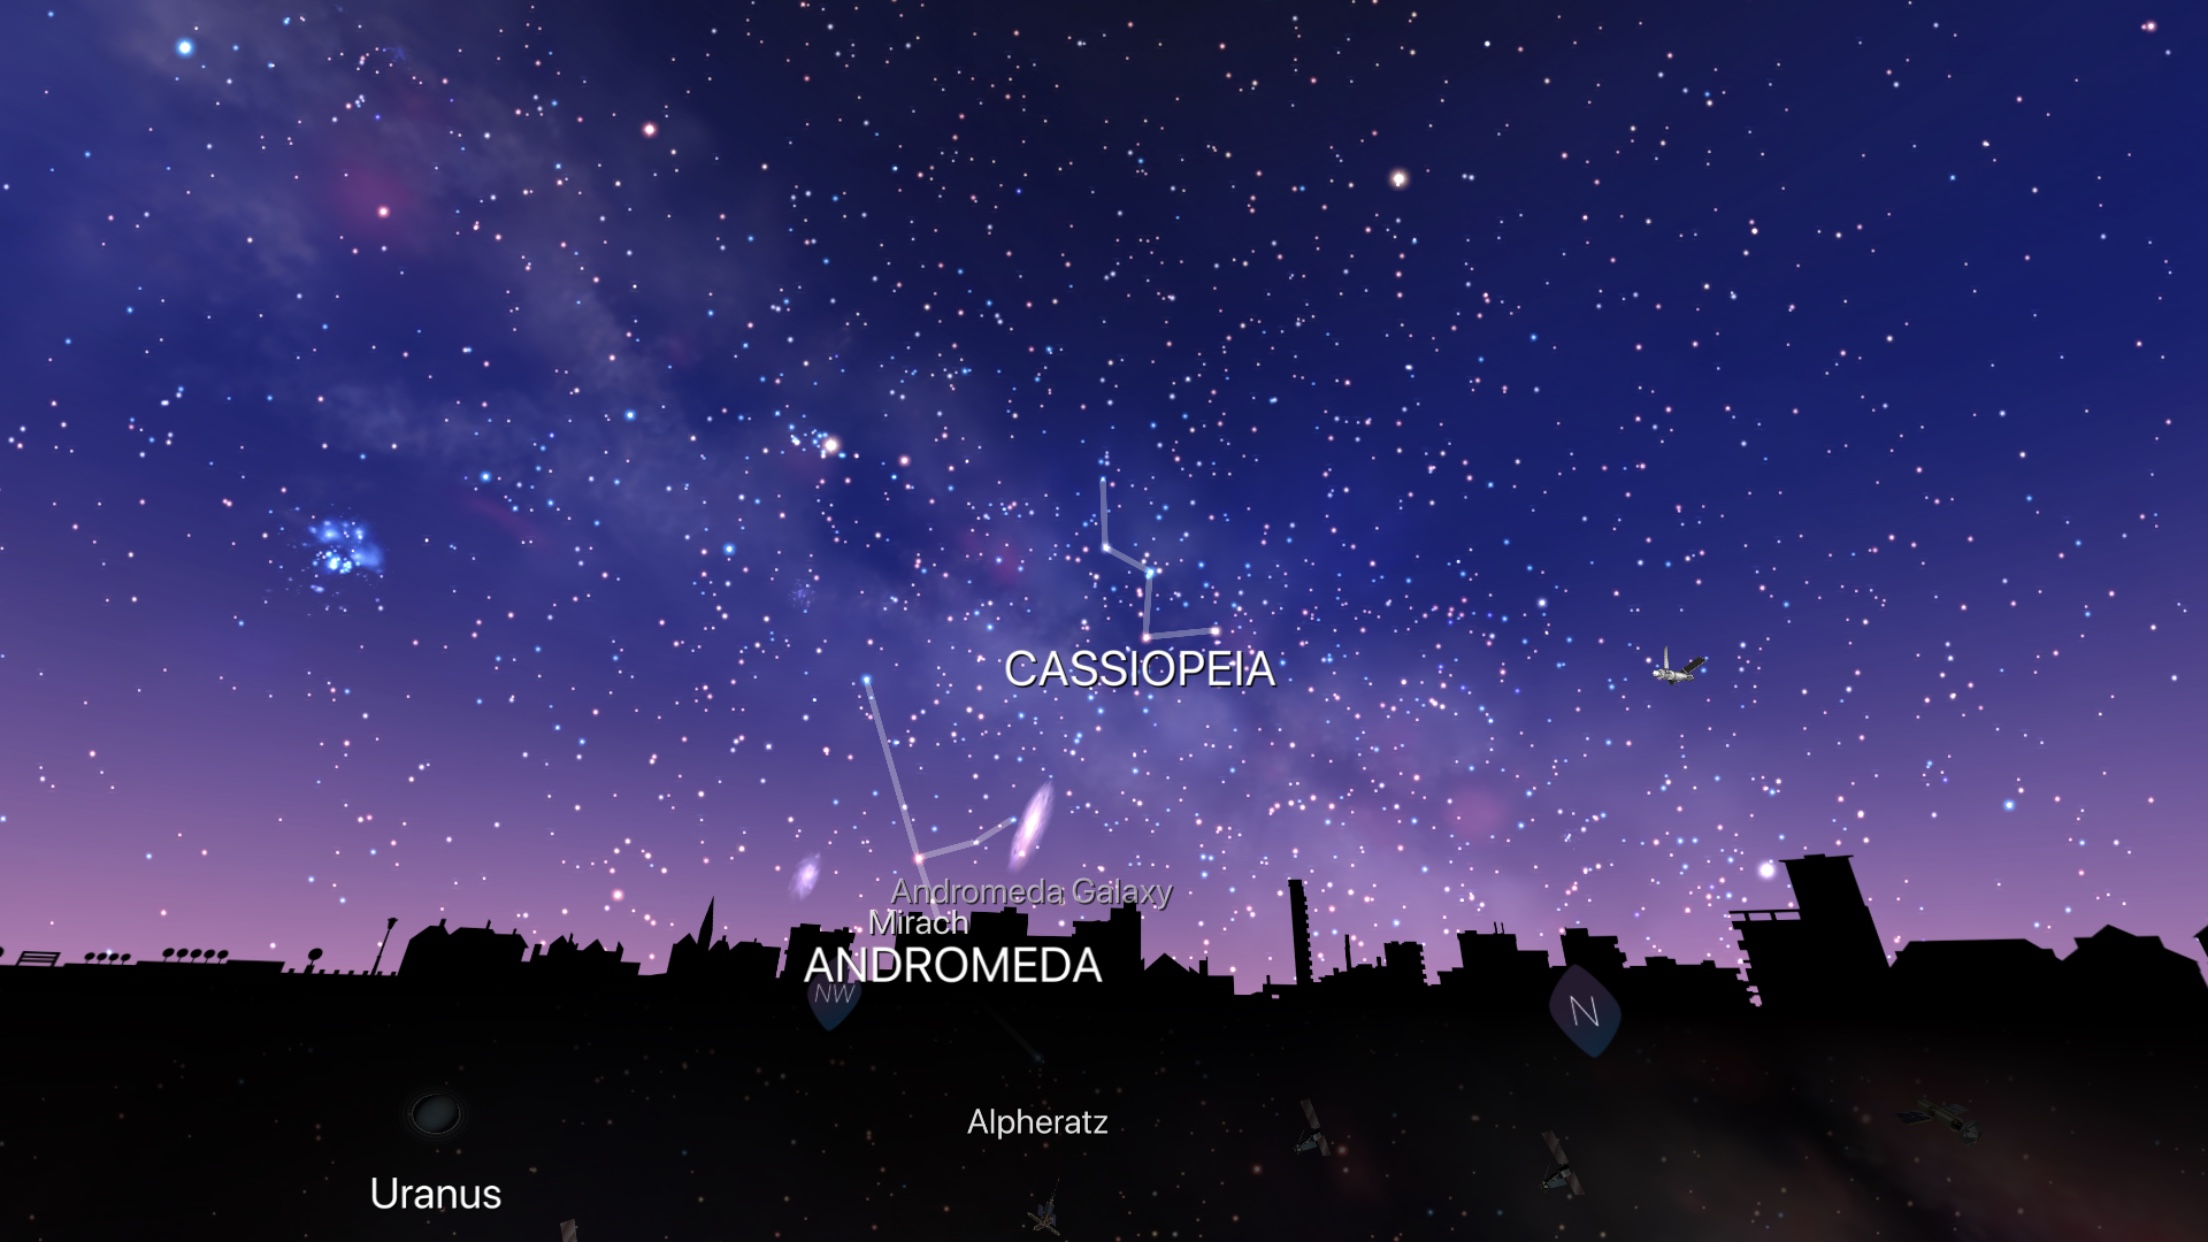 Cassiopeia and Andromeda in Night Sky iOS app screenshot. One of the best astronomy apps for iPhone.